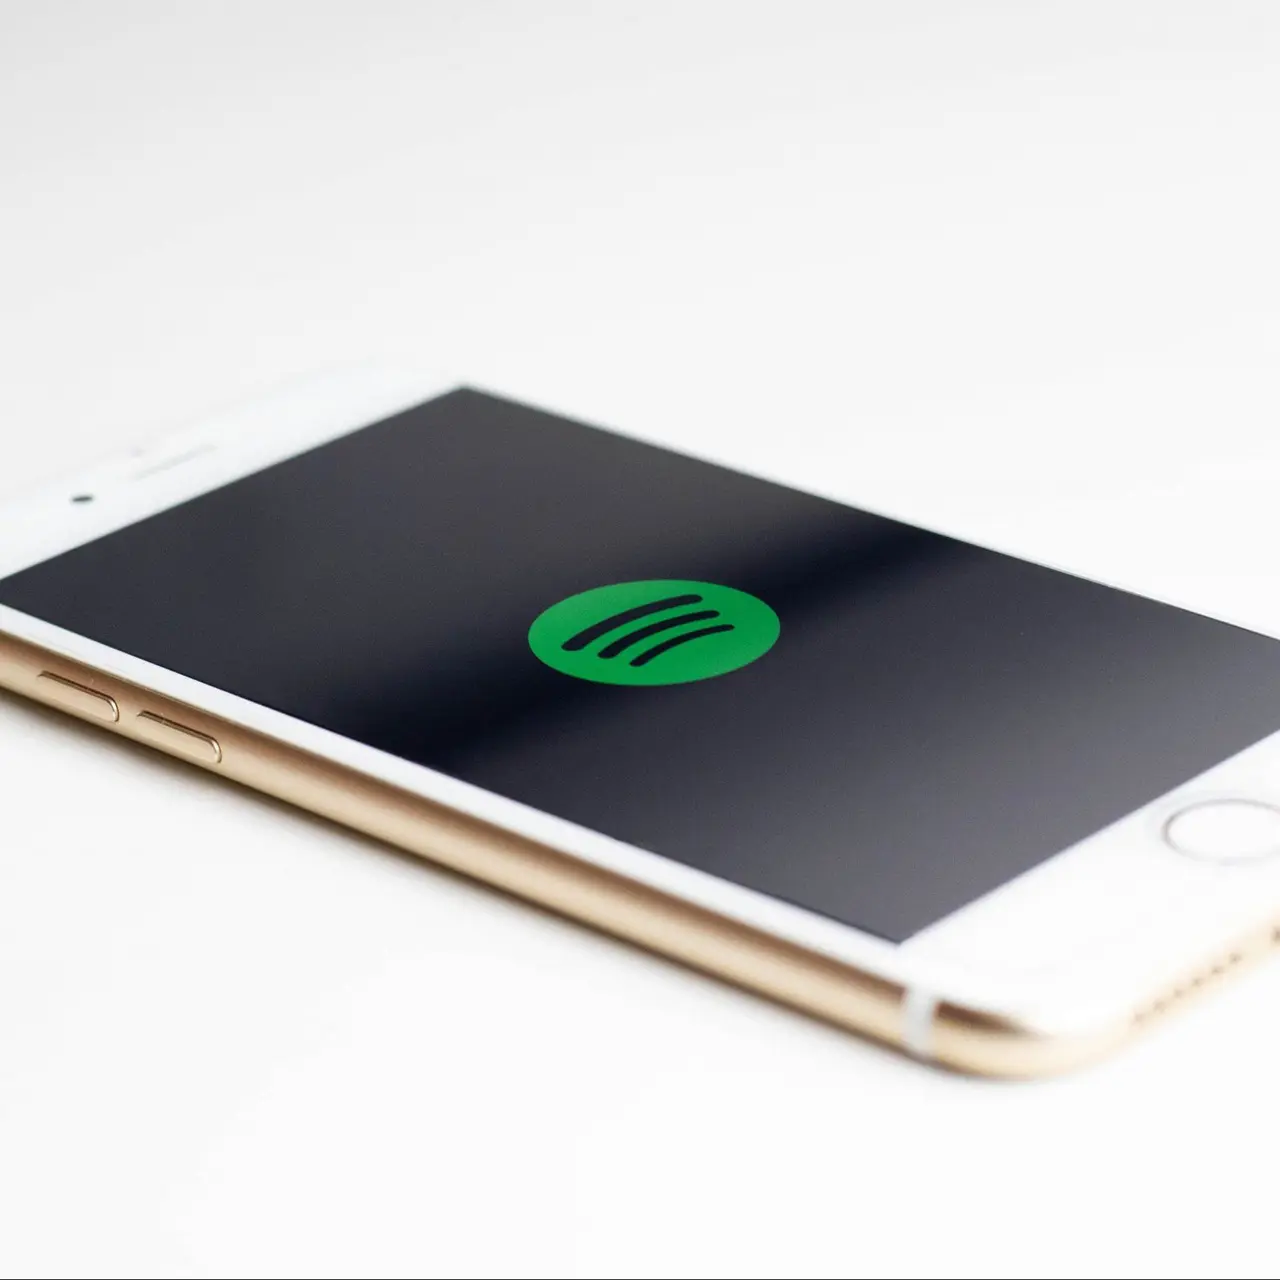 white iphone with a black screen and green spotify logo in the center.